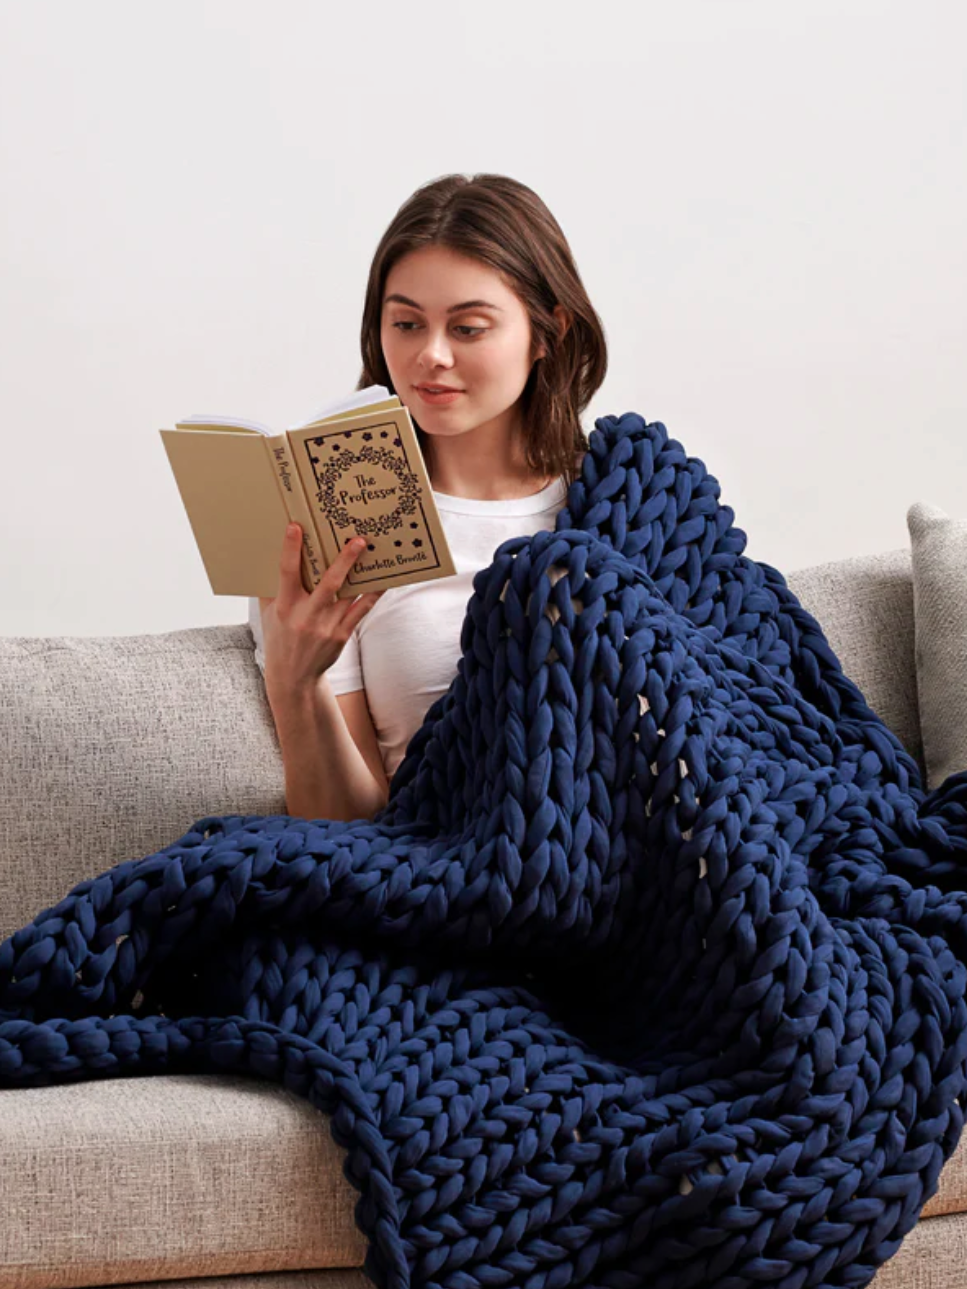 A woman reads a book with a blue blanket draped over her